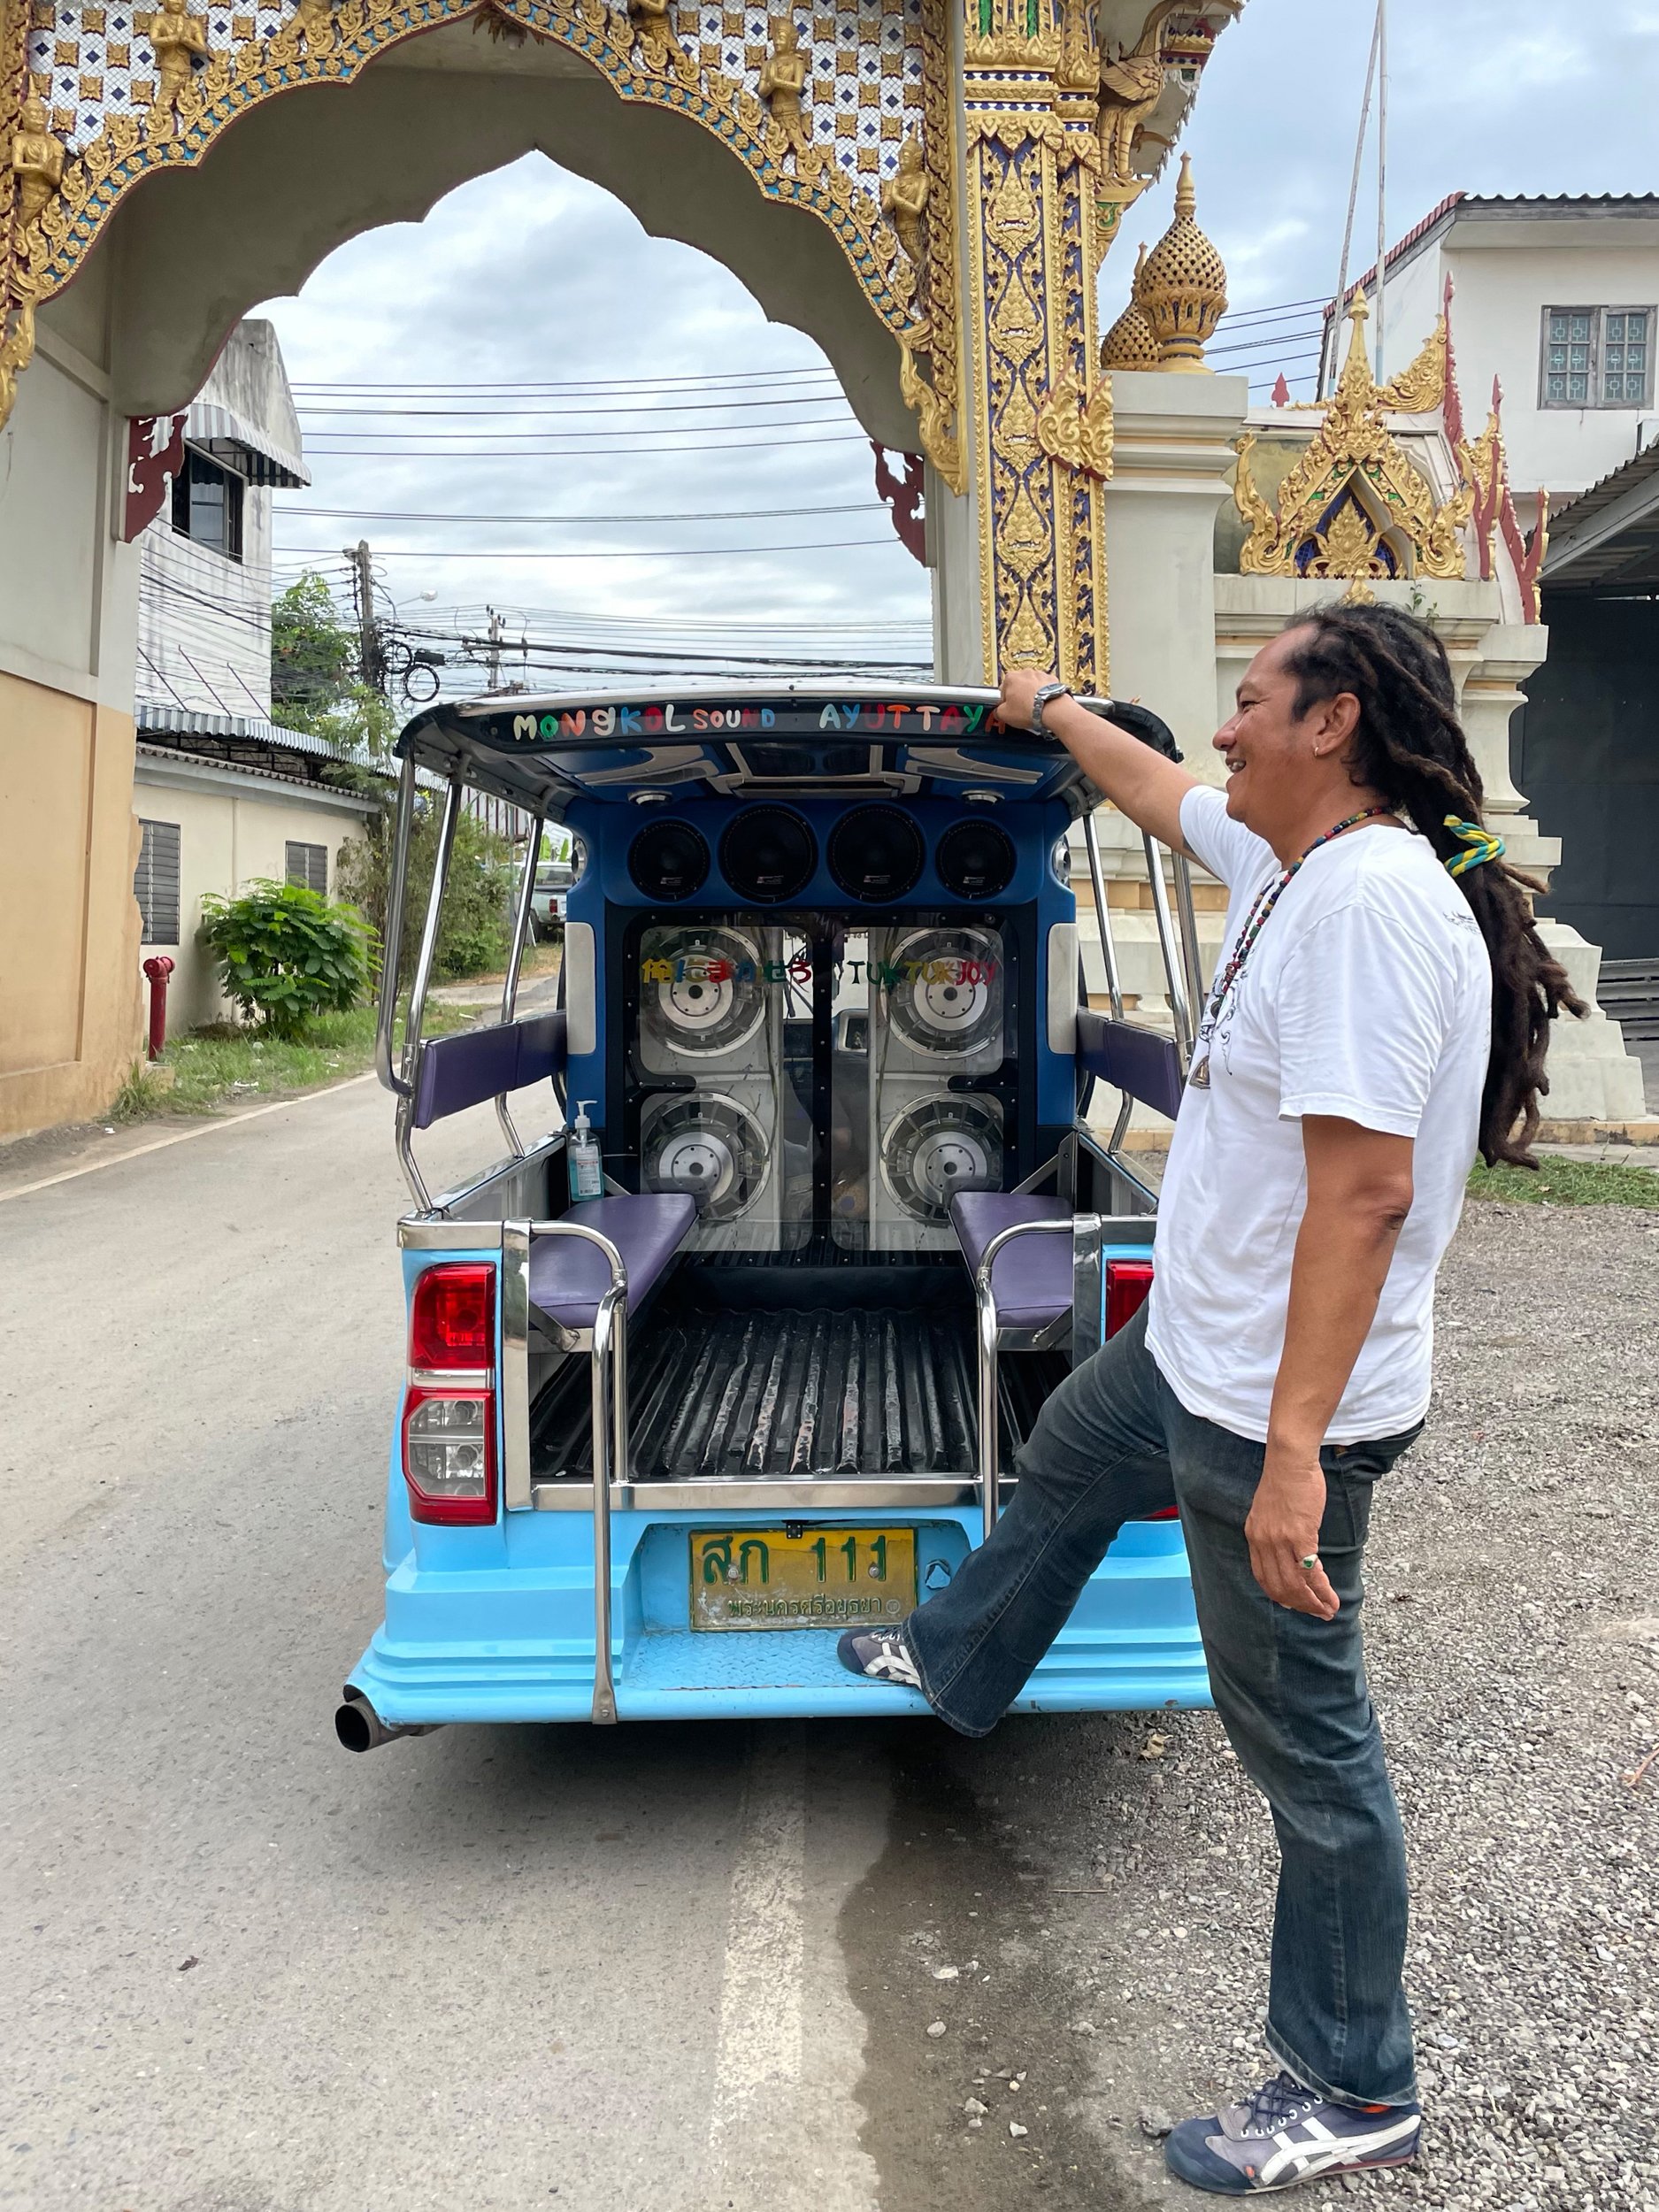 Our driver Joy with his tuk tuk - perfect way to see the sights